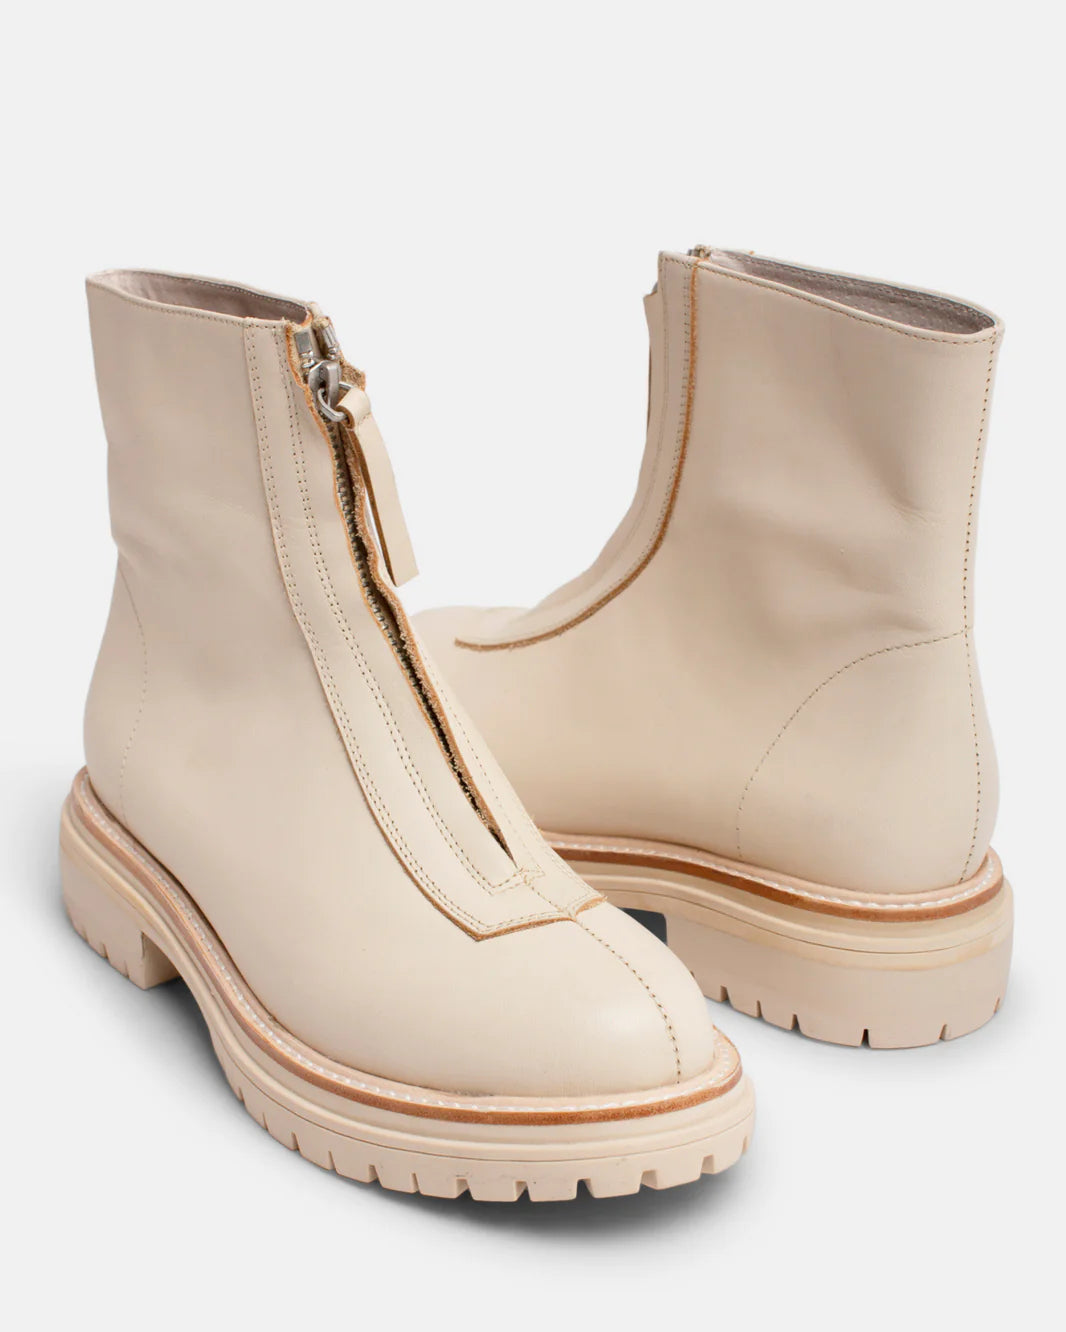 Oz Leather Boot in Almond